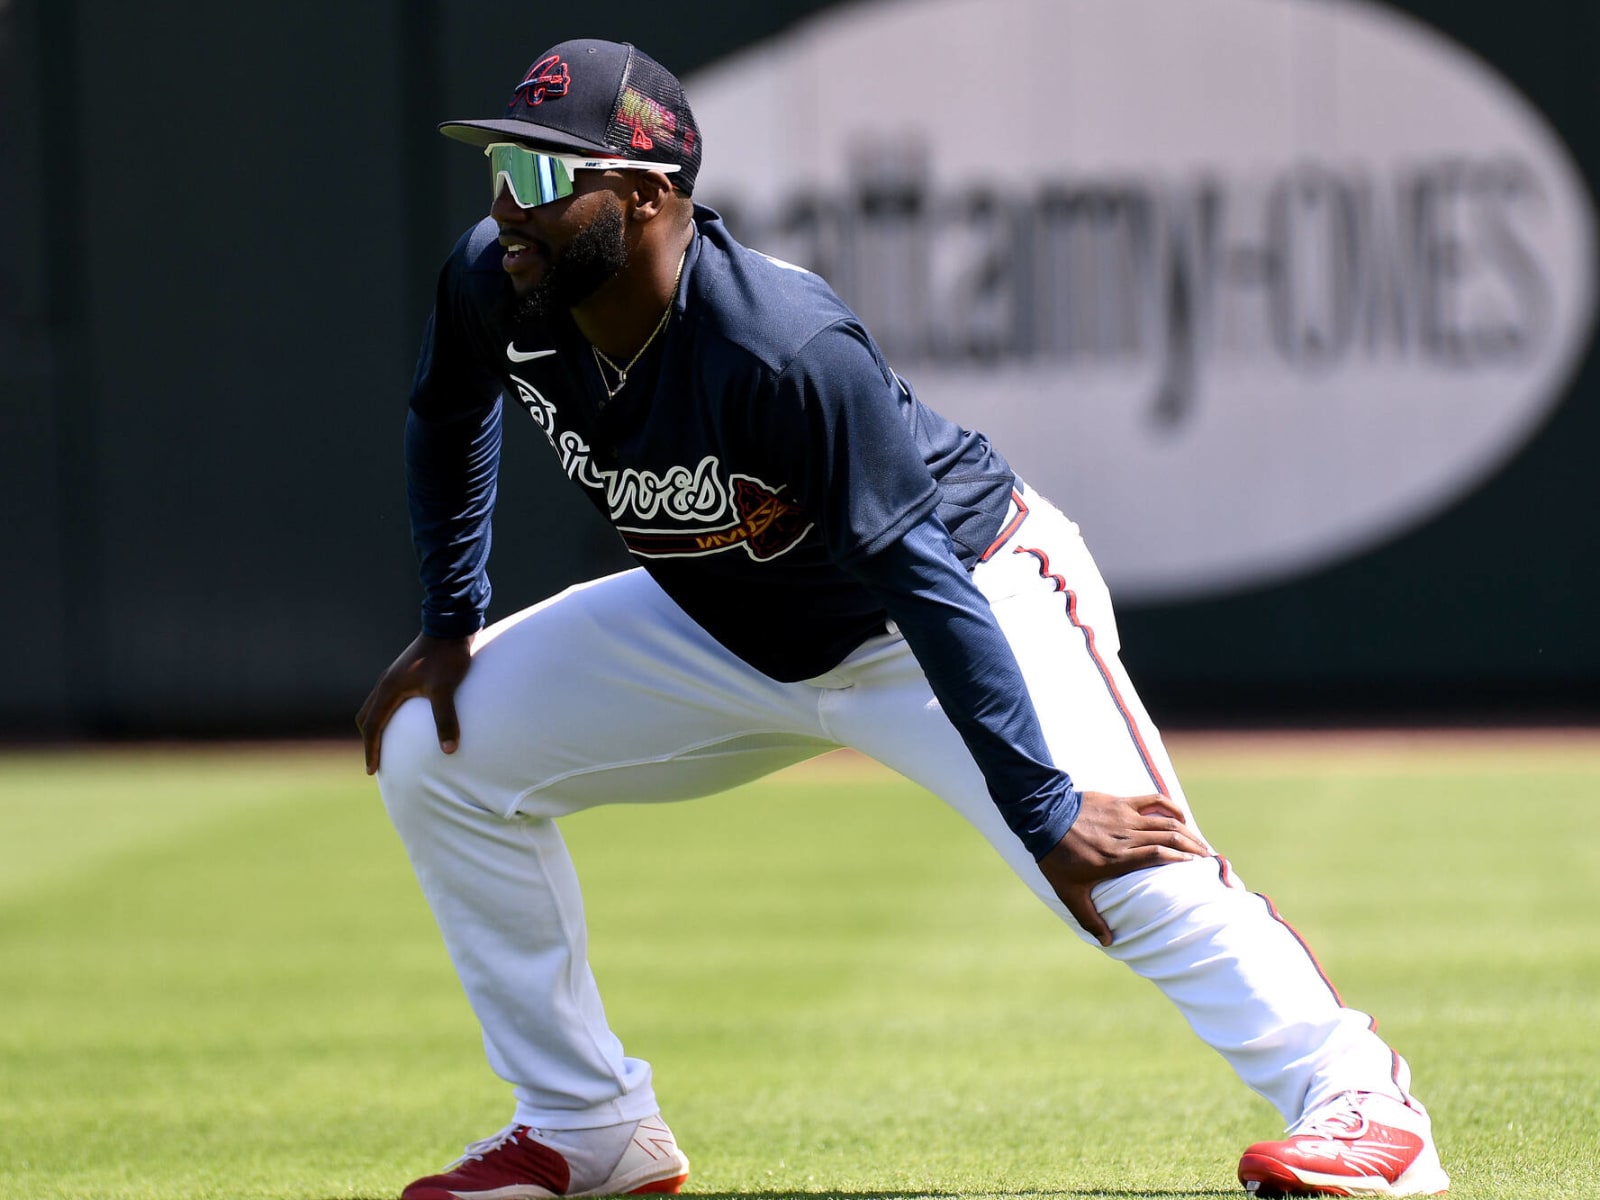 Braves call up top prospect Harris to boost outfield defense